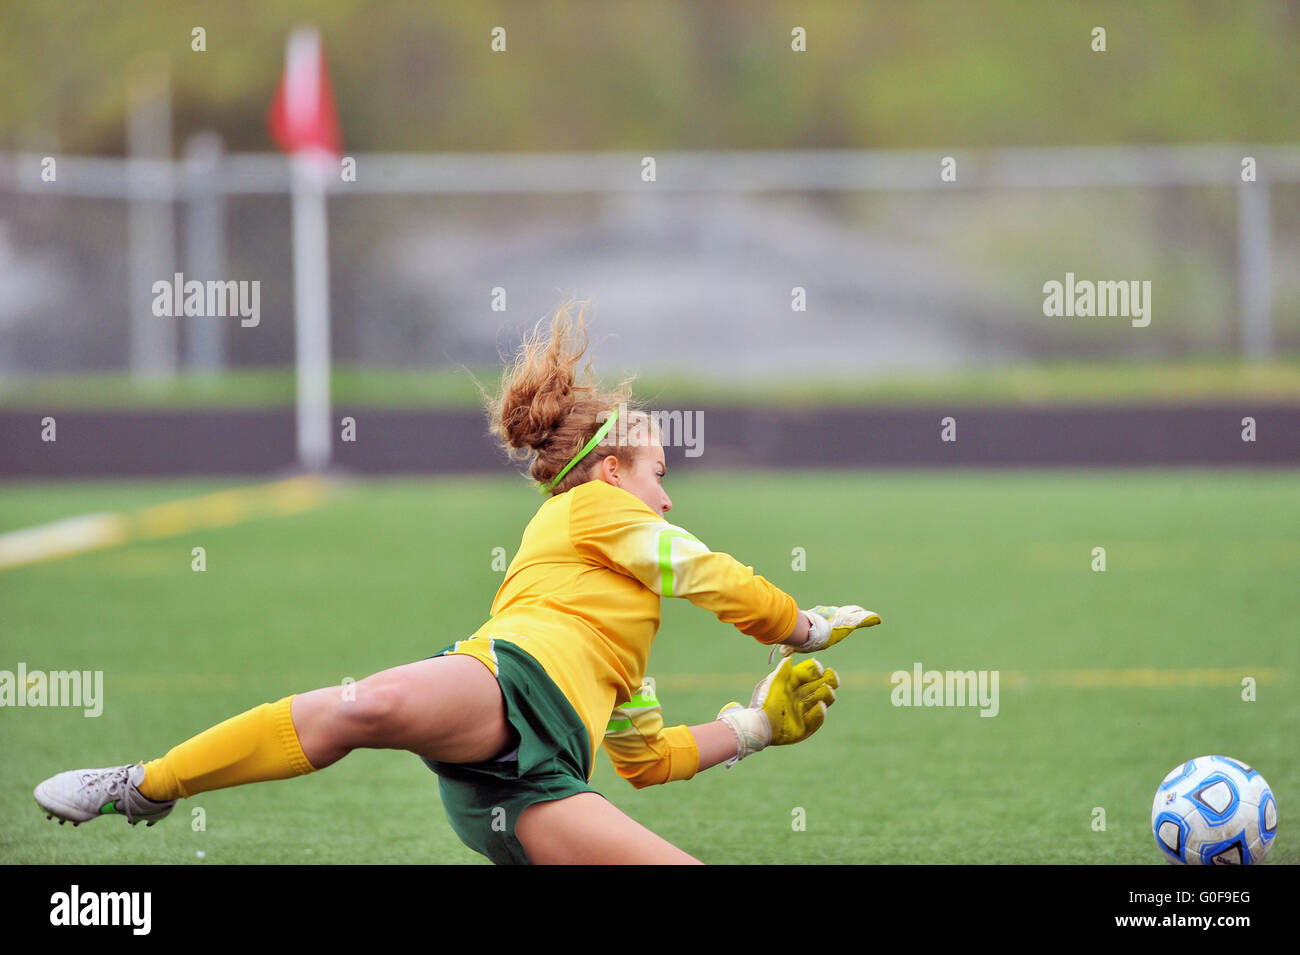 A sprawling keeper diving to make a save on a shot during a high school soccer match. USA. Stock Photo